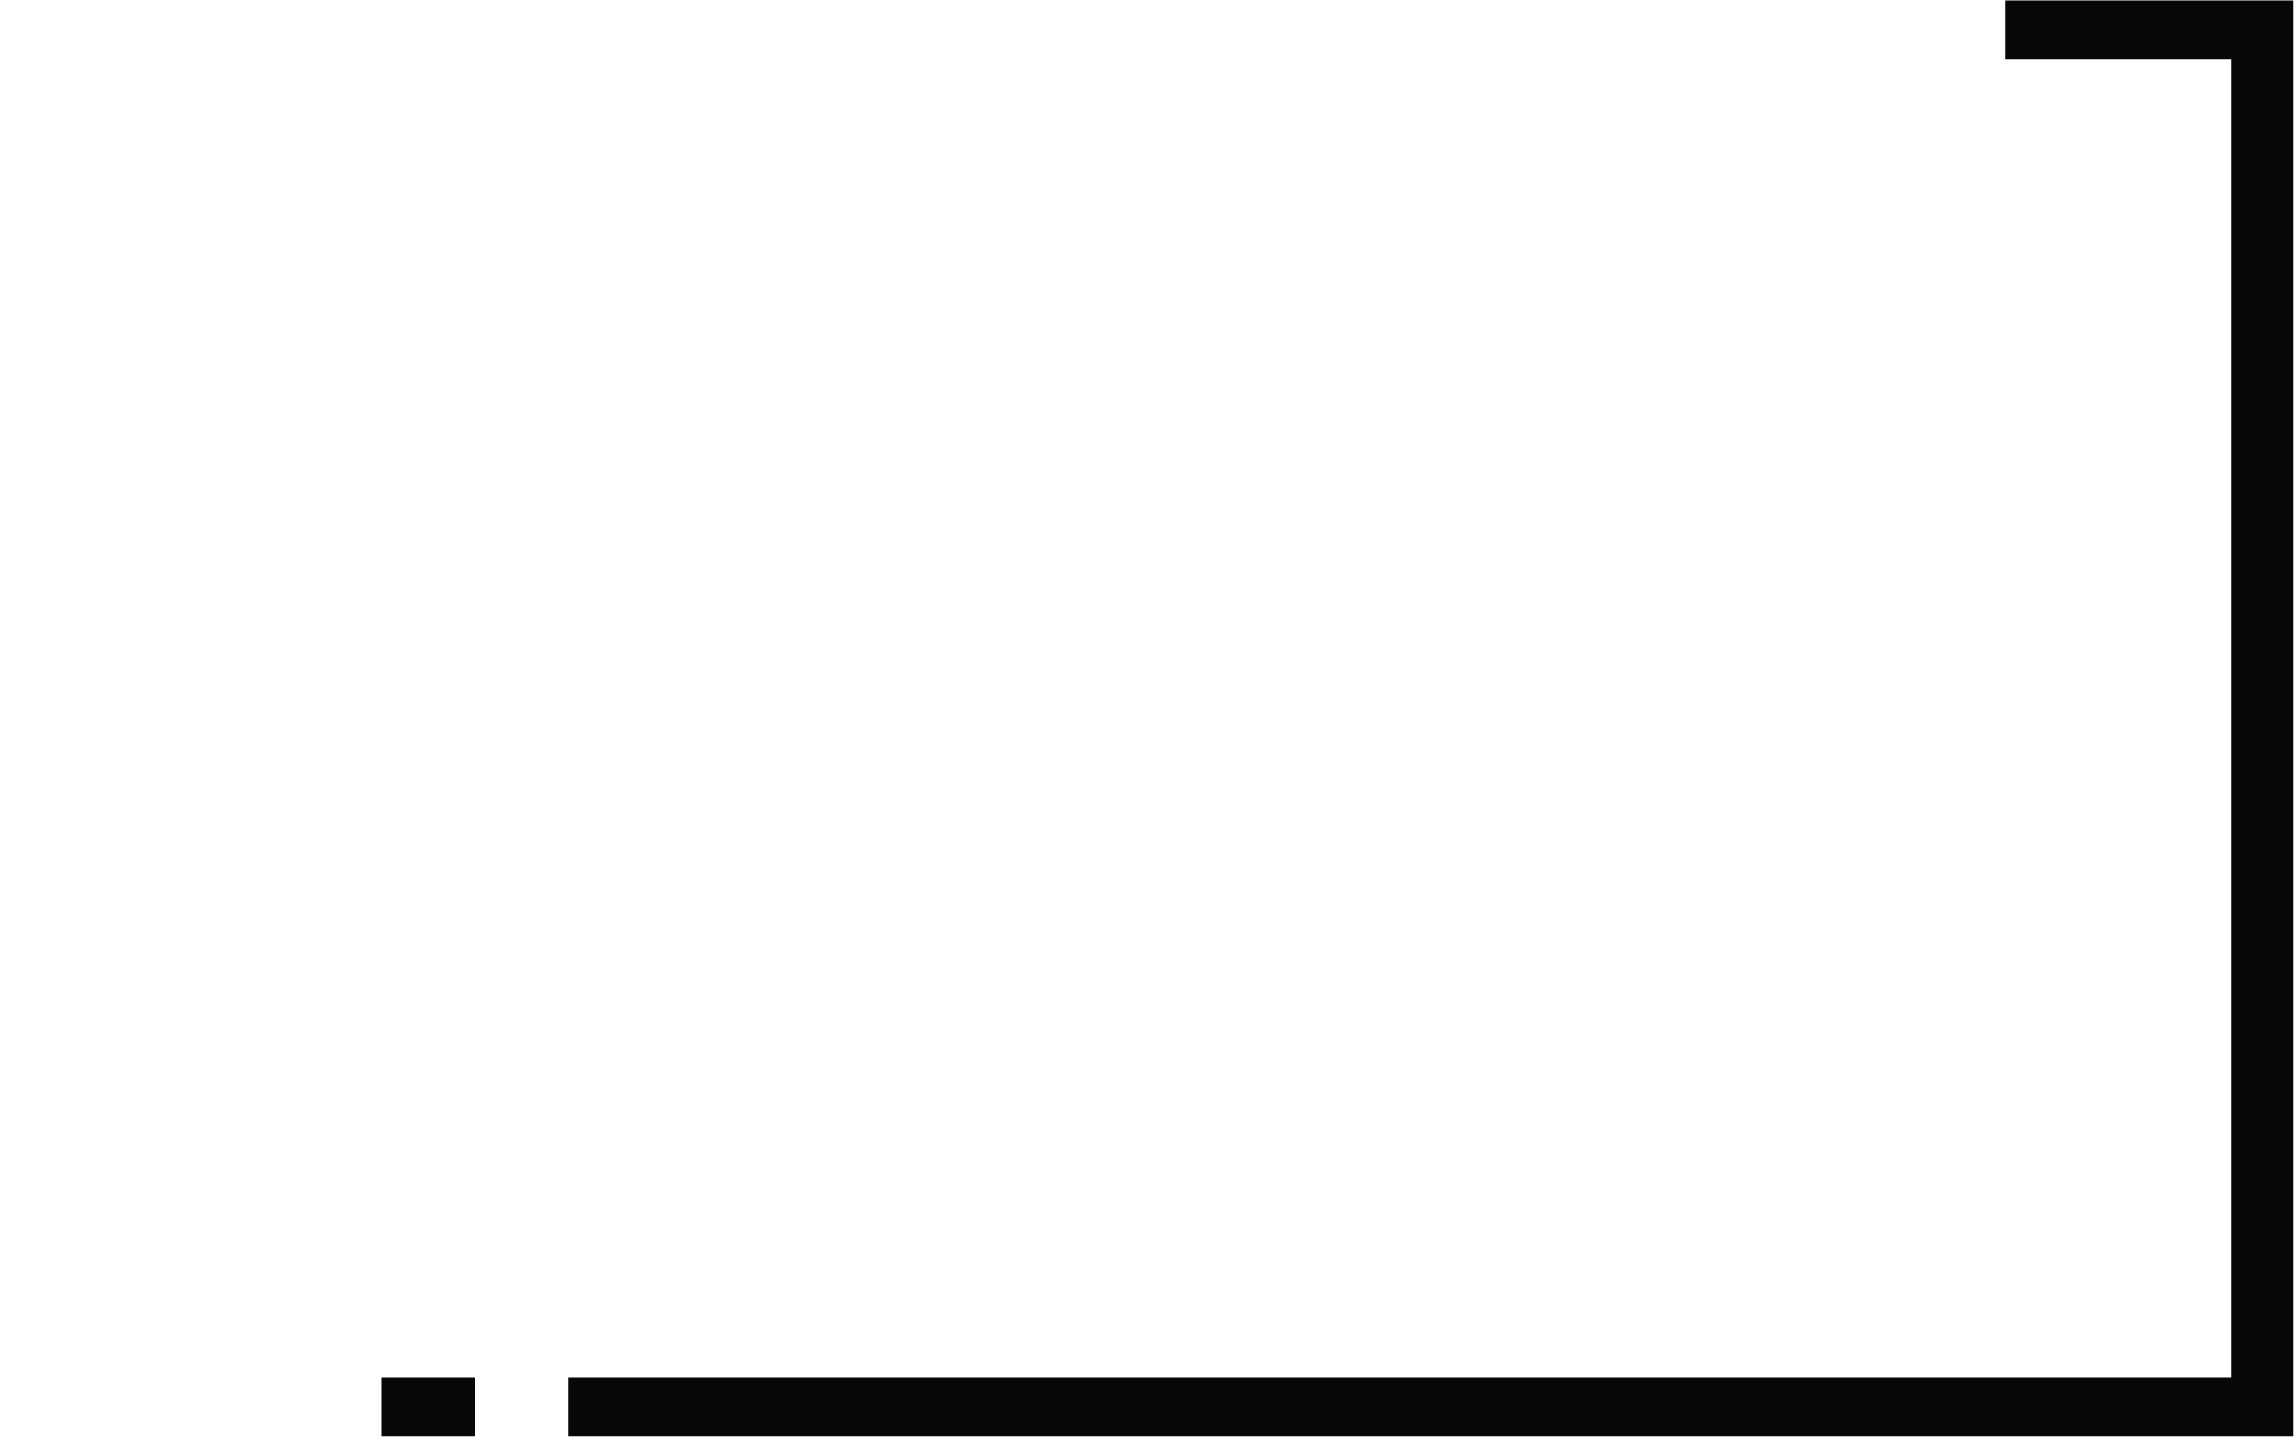 KWI Commercial Holdings